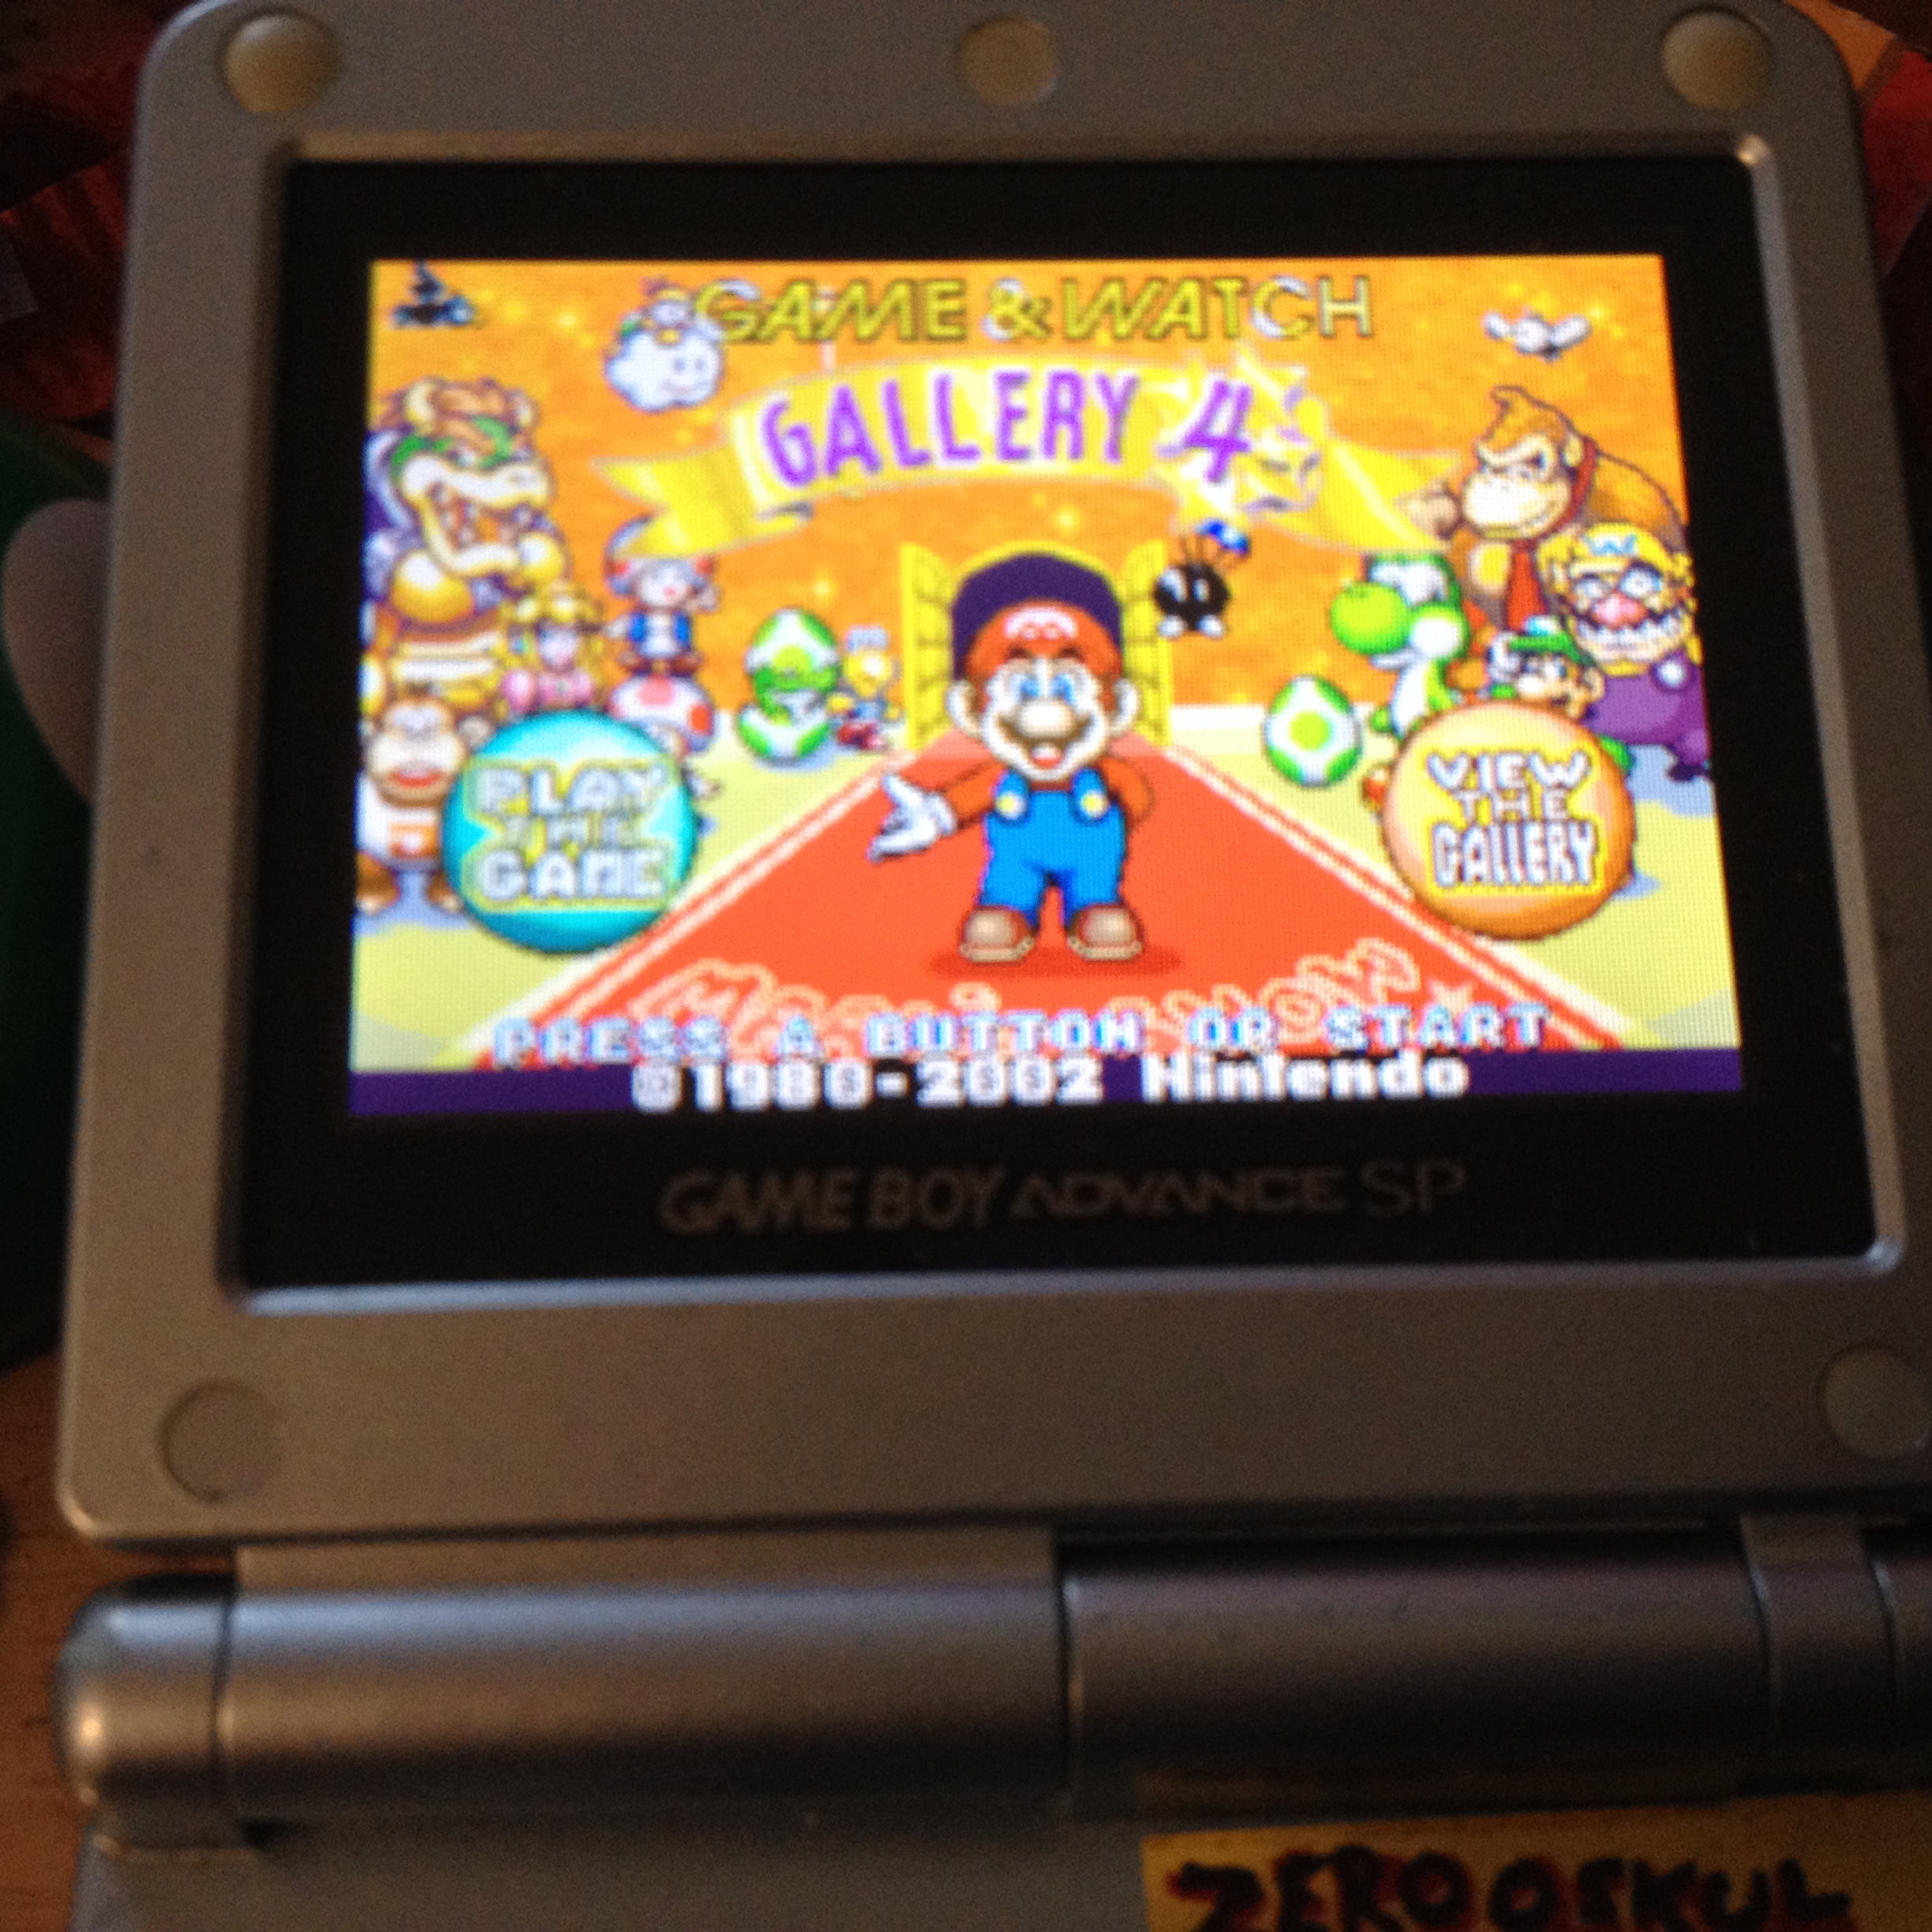 zerooskul: Game & Watch Gallery 4: Rain Shower [Classic: Easy] (GBA) 1,049 points on 2019-08-13 11:30:19